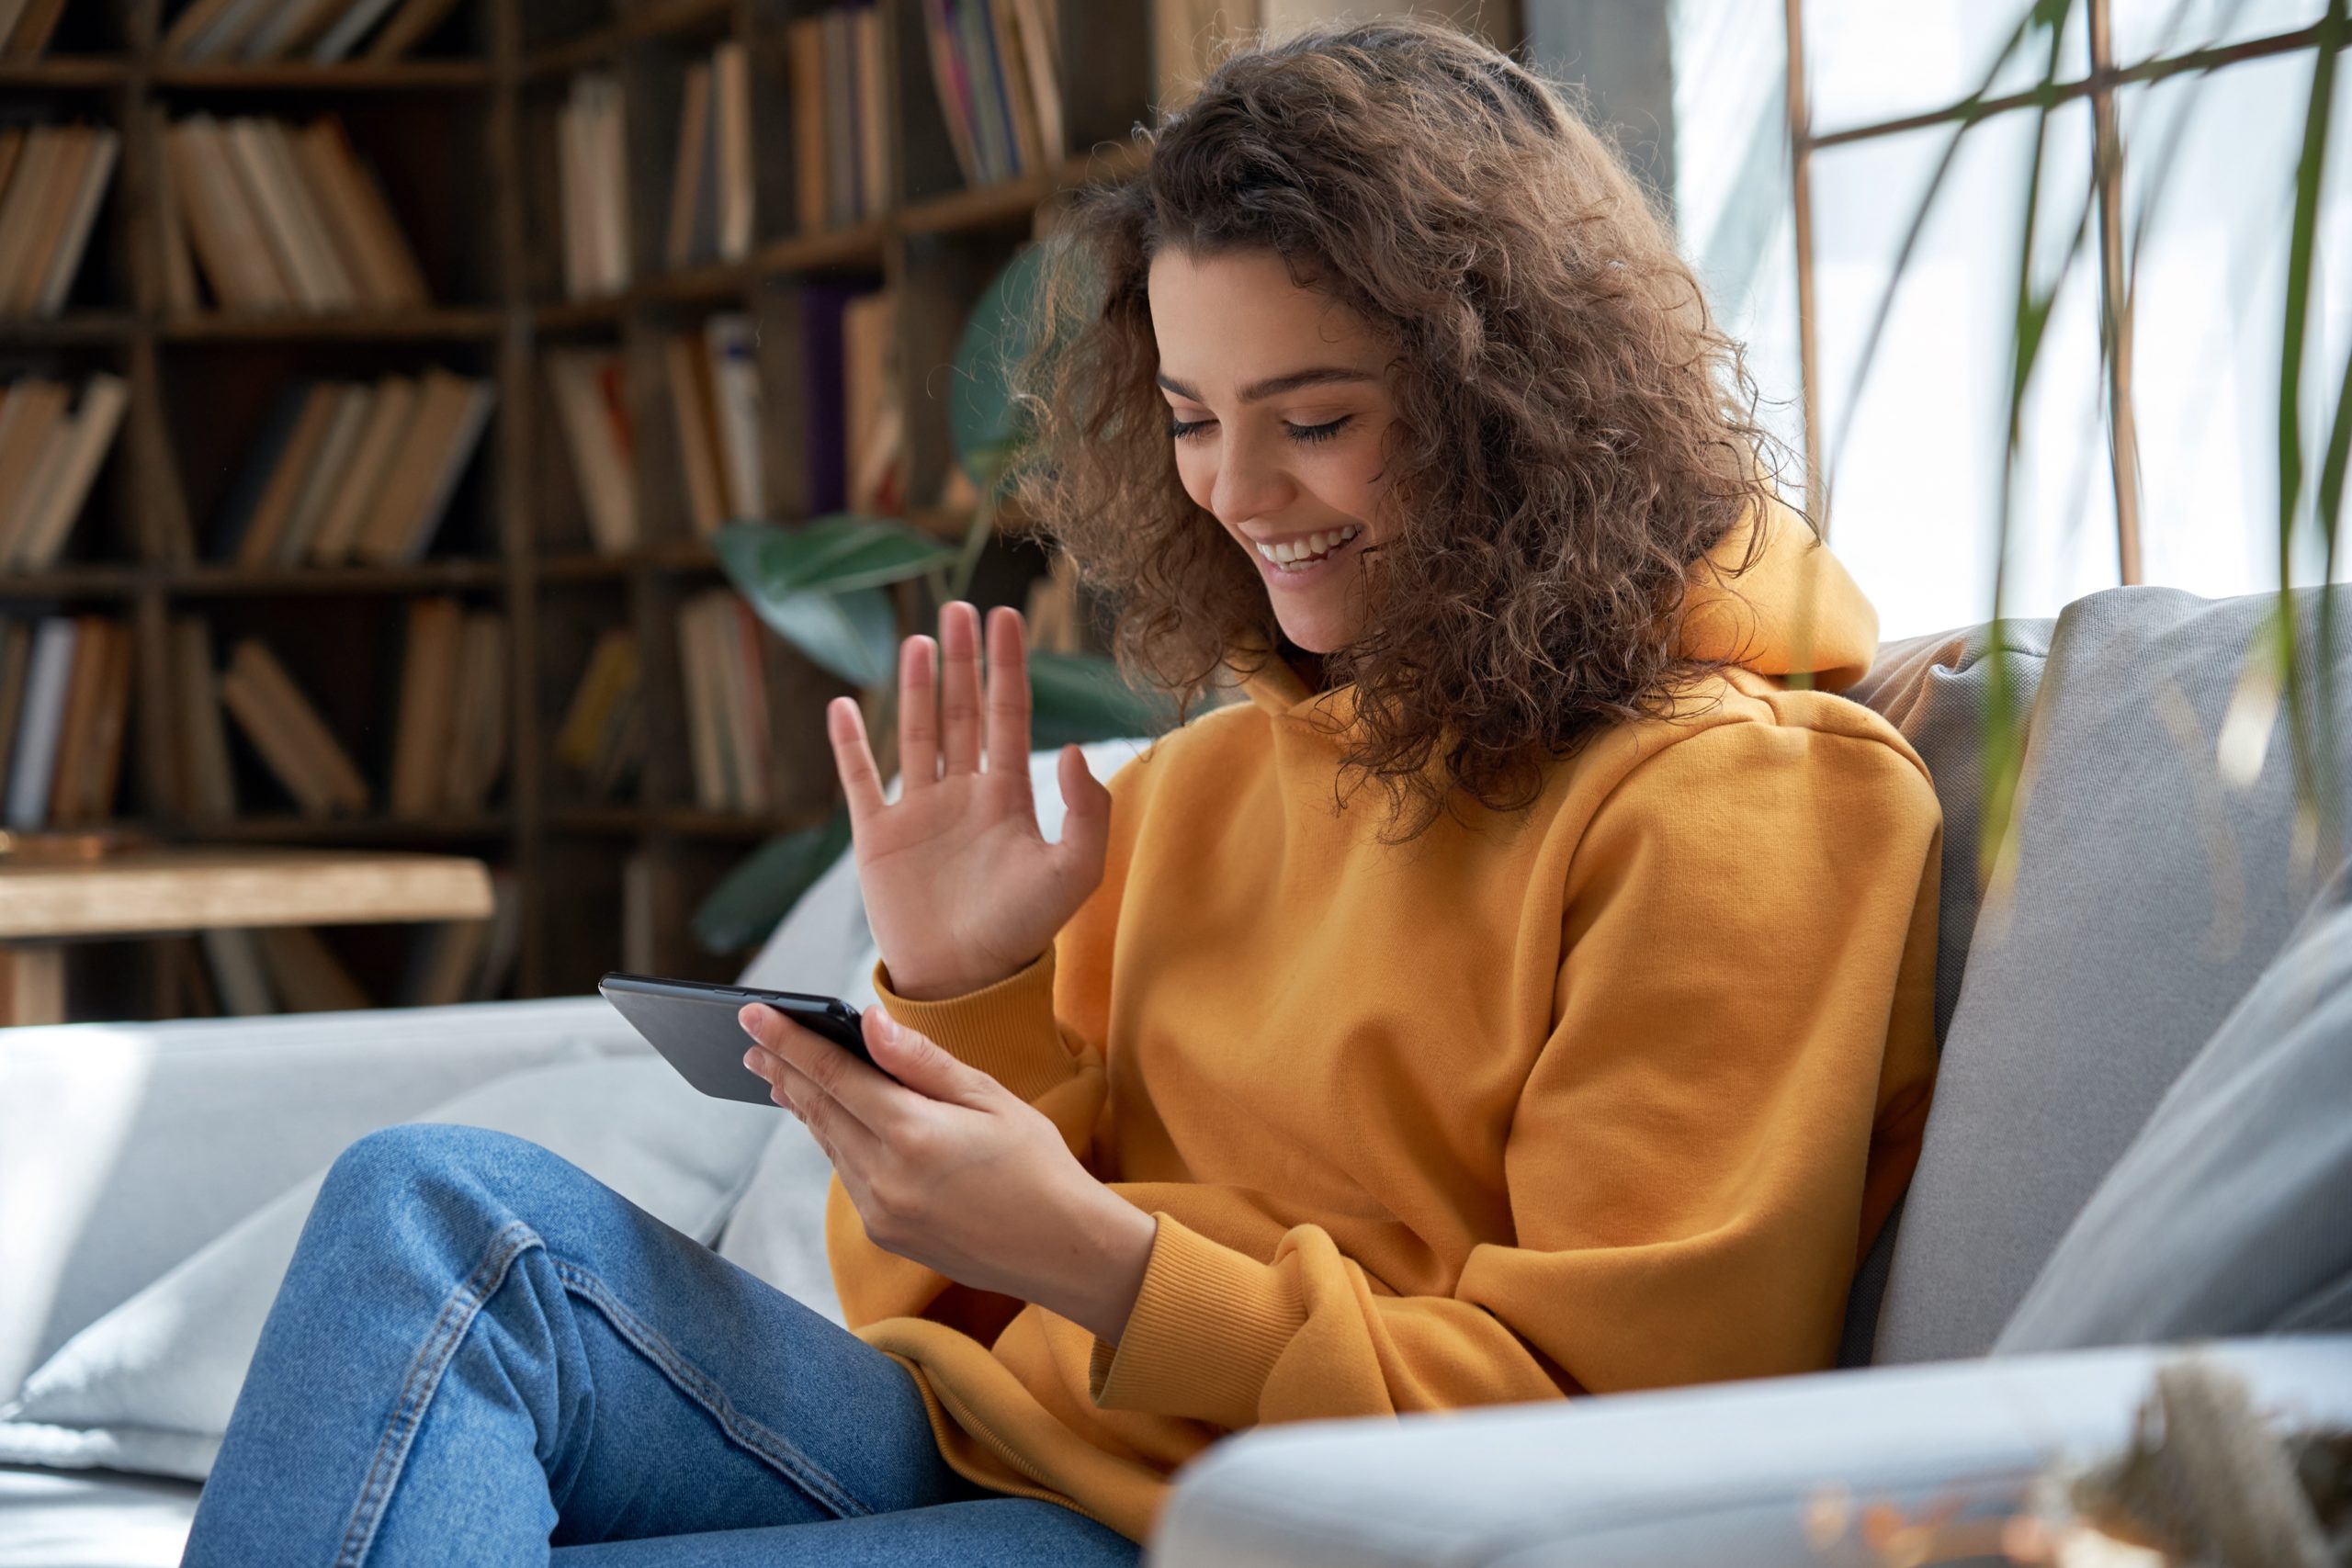 photo of a young woman using a smart phone while sitting on a couch. The young woman has dark curly hair and Is wearing a yellow jumper and denim blue jeans. She is smiling and waving at the phone.